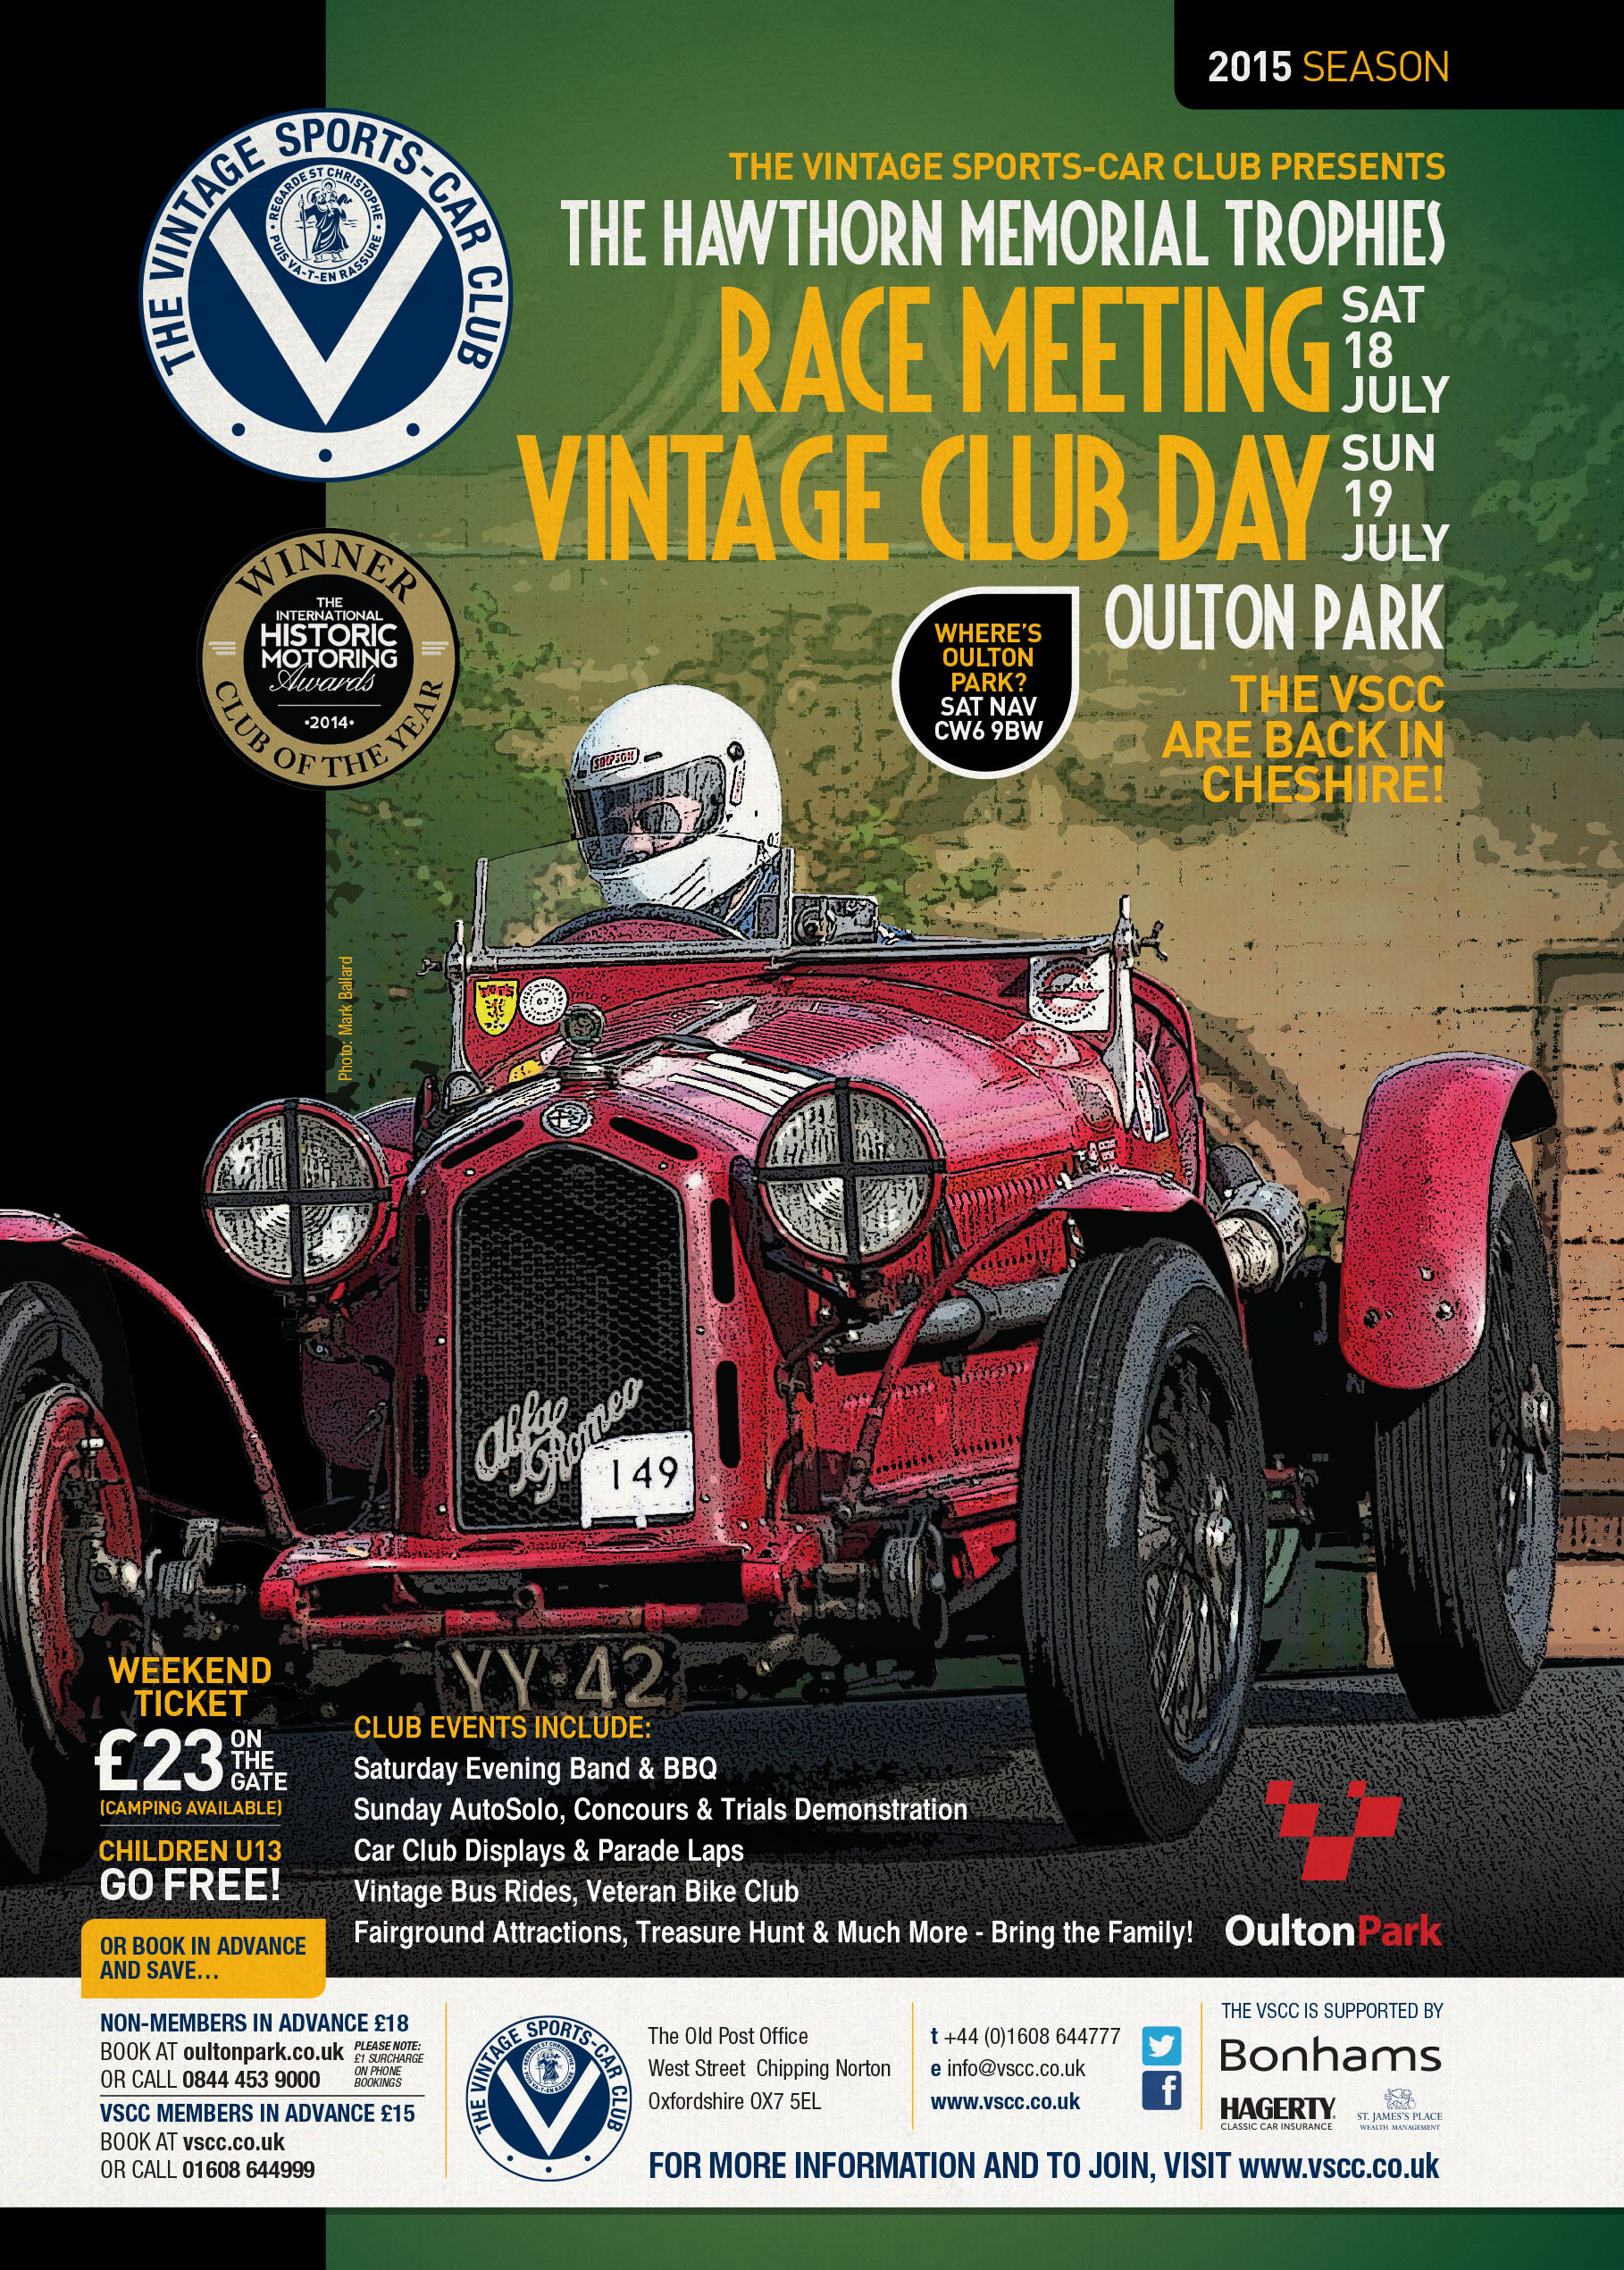 Oulton Park set to welcome back the Vintage Sports-Car Club tomorrow cover